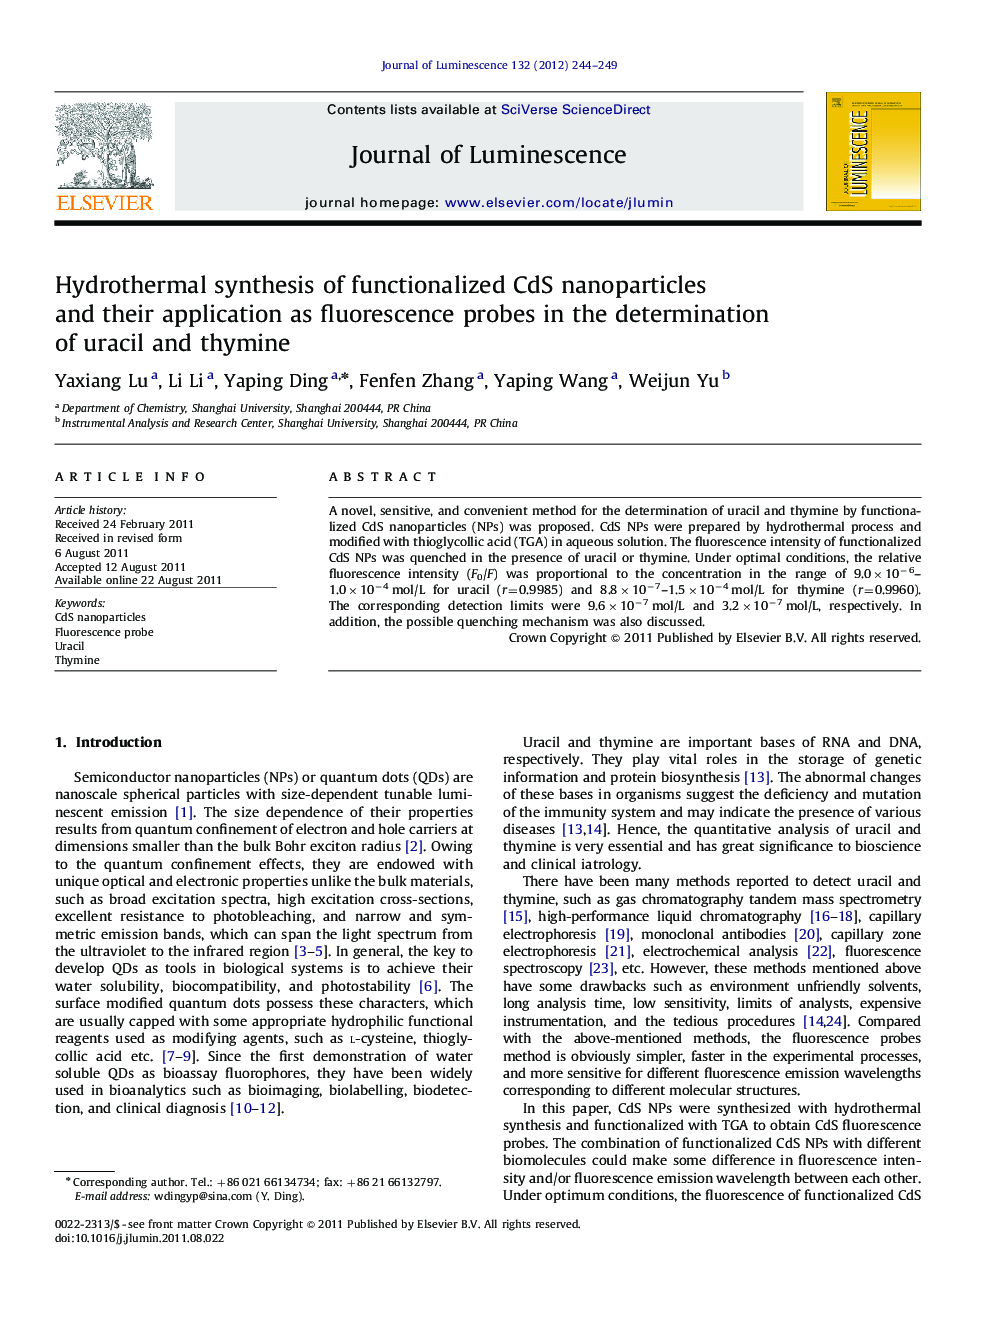 Hydrothermal synthesis of functionalized CdS nanoparticles and their application as fluorescence probes in the determination of uracil and thymine